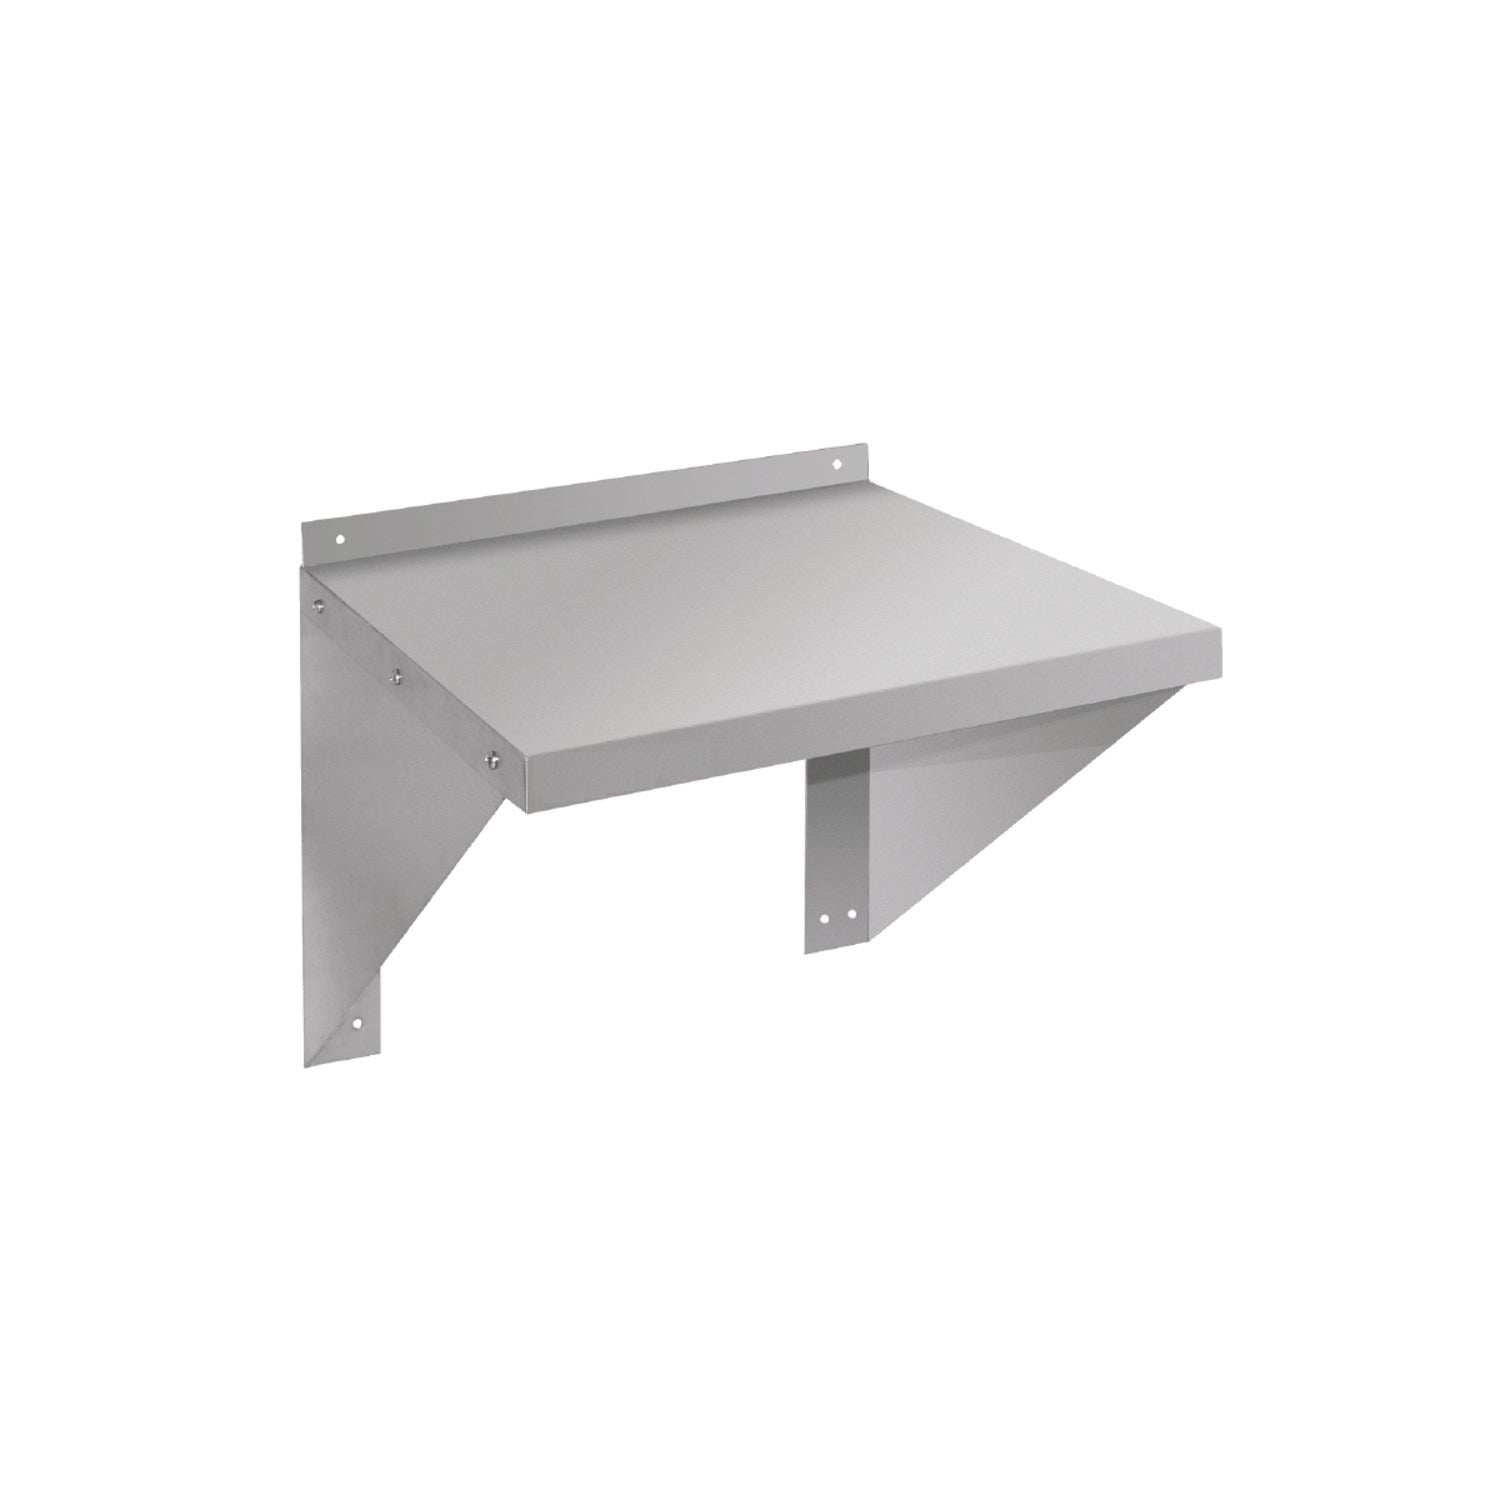 Wall Shelf Stainless steel 600x300x490mm.Product ref:00348.